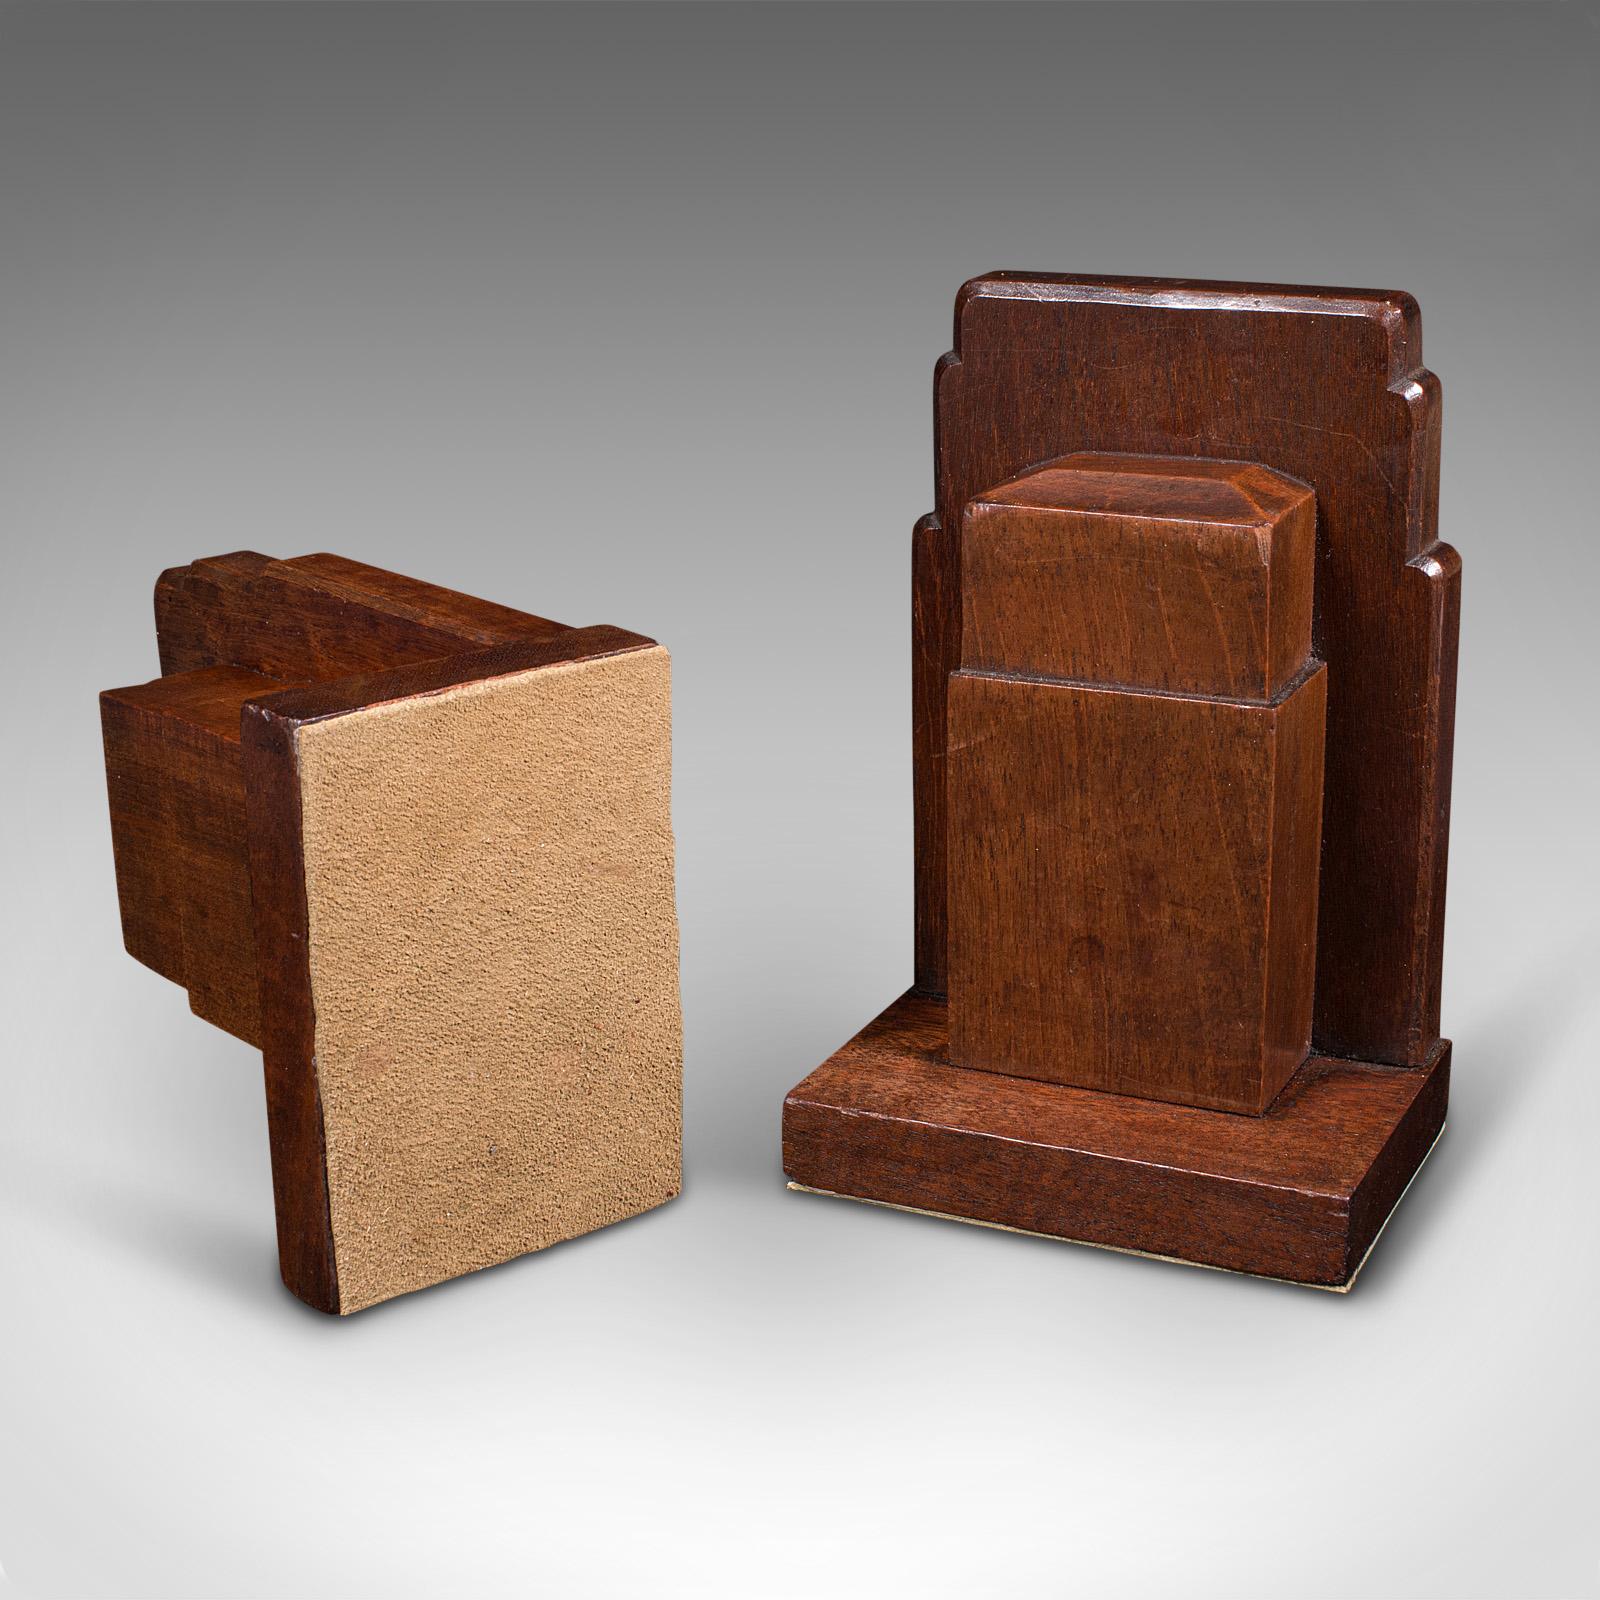 Vintage Pair of Decorative Bookends, English, Walnut, Gordon Russell, Circa 1930 For Sale 2